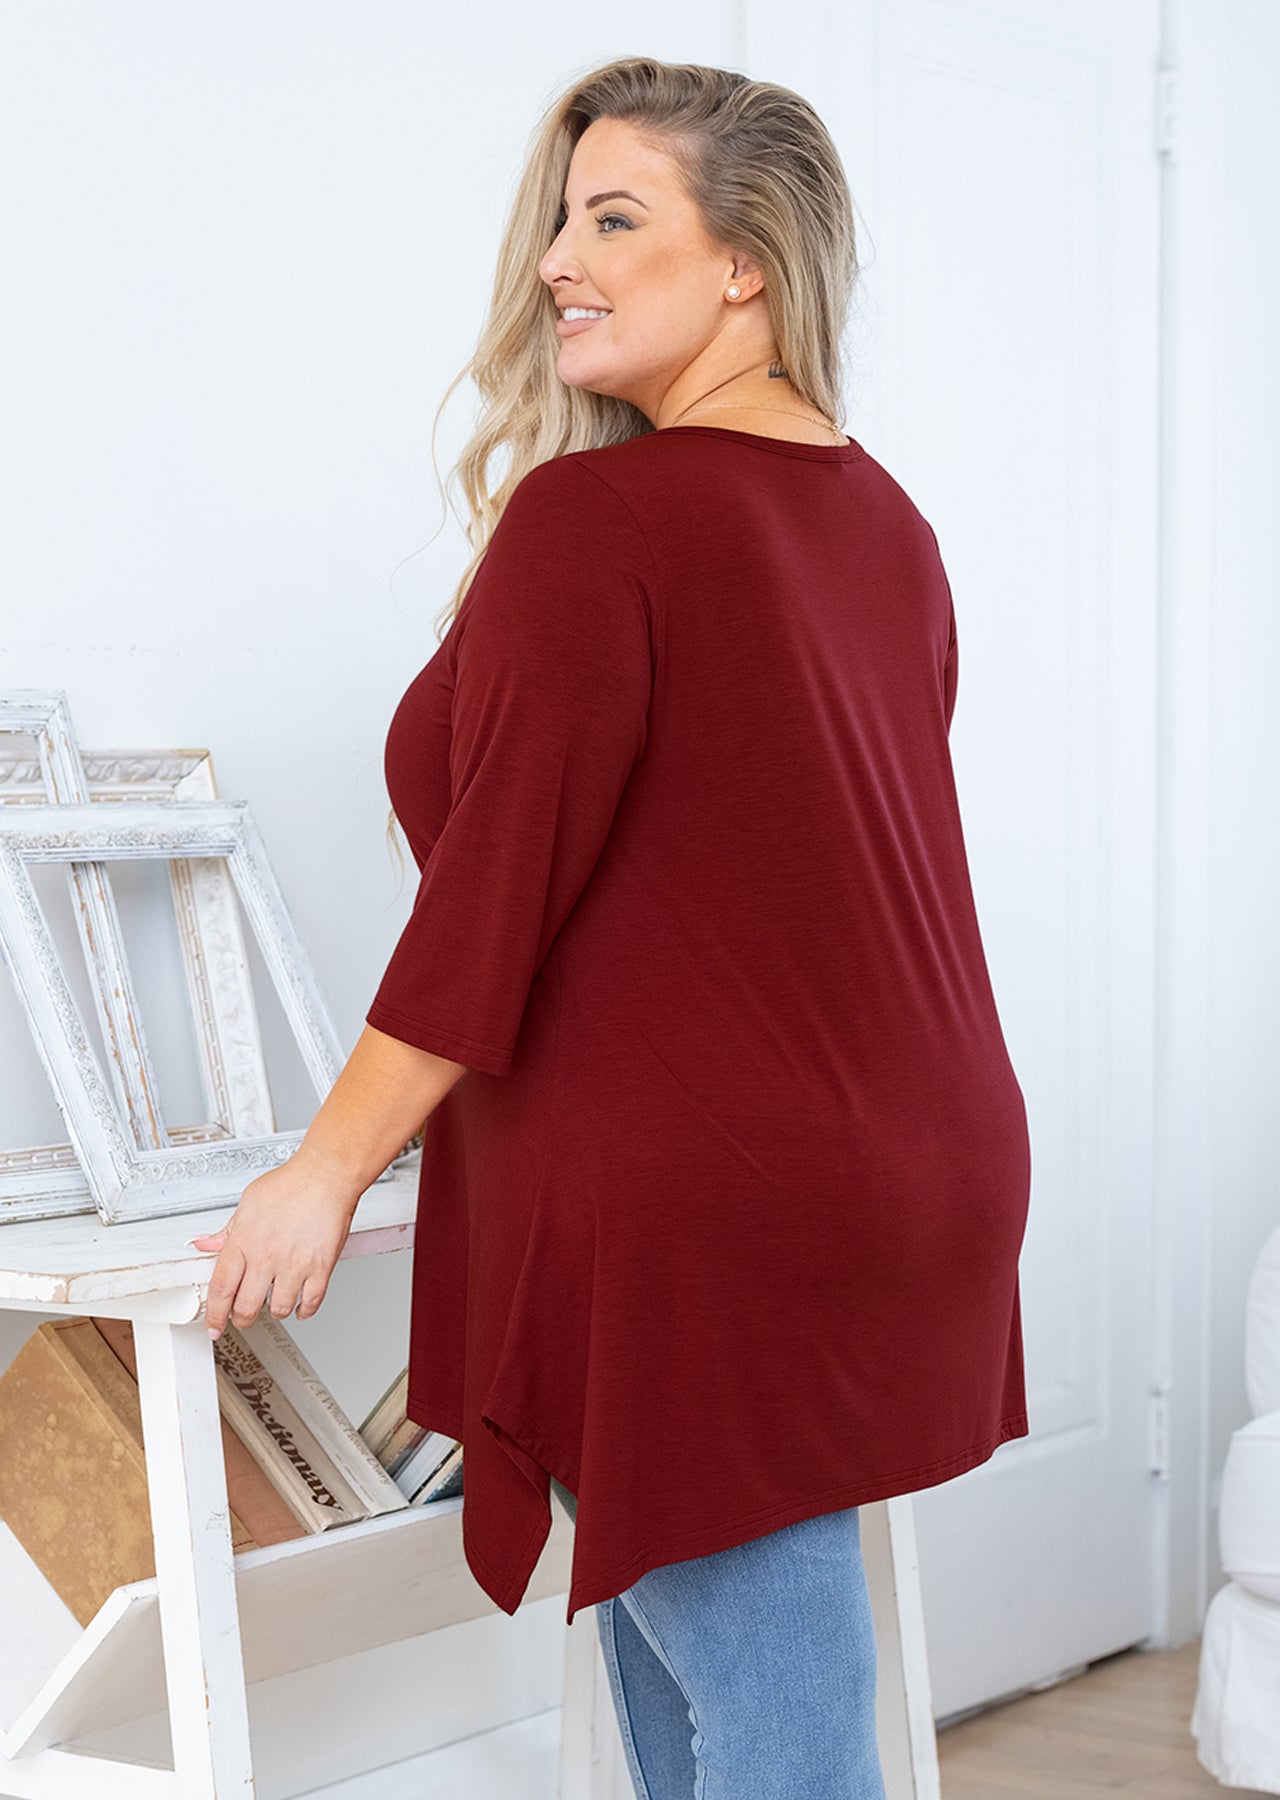 SHOWMALL Plus Size Tops for Women Short Sleeve Burgundy 5X Tunic Shirt  Summer Clothing Loose Fitting Clothes